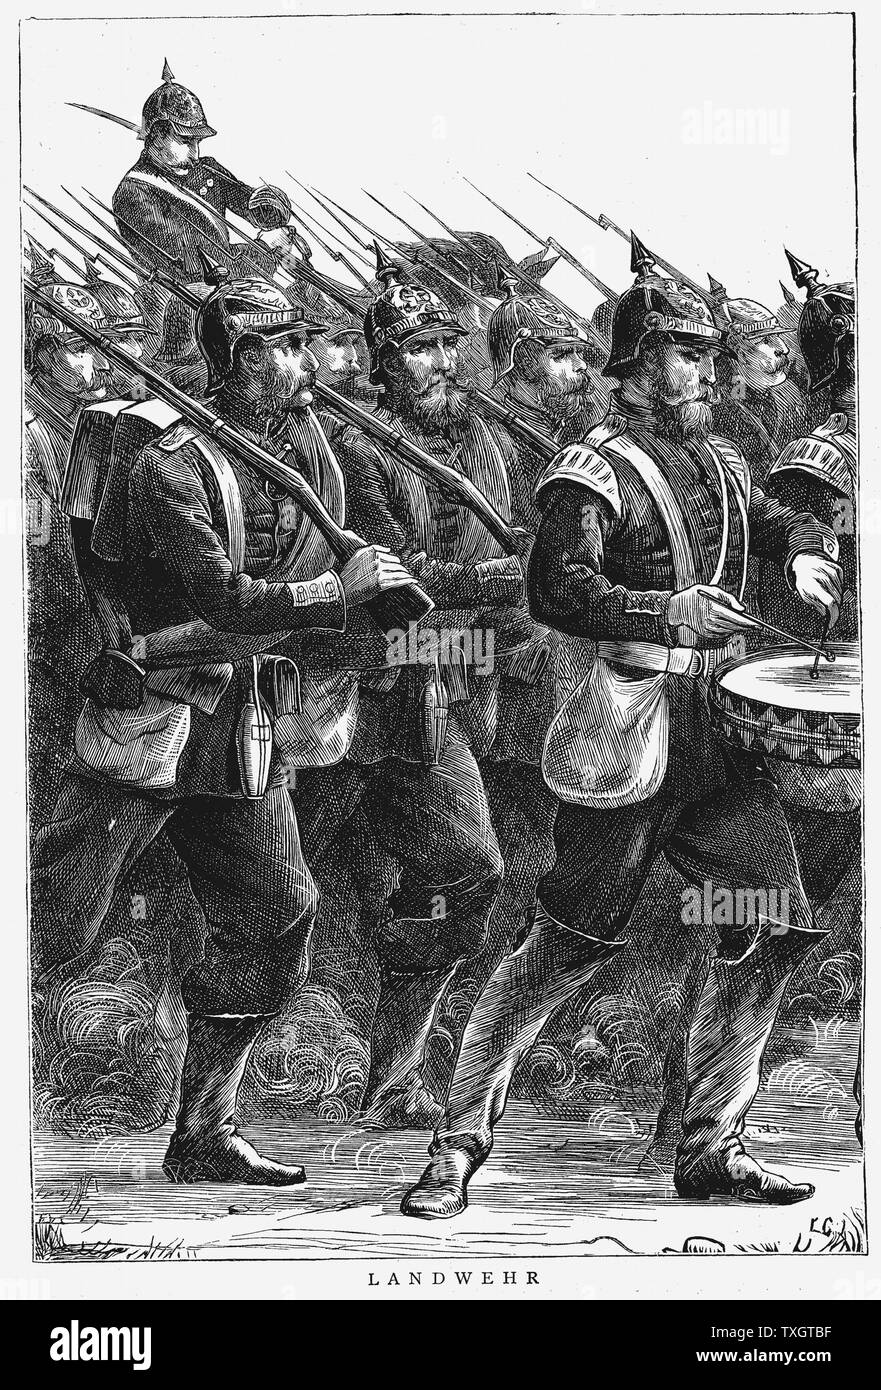 Franco-Prussian War 1870-1871 : A Landwehr regiment of the Prussian army on the march led by drummer September 1870 Wood engraving Stock Photo